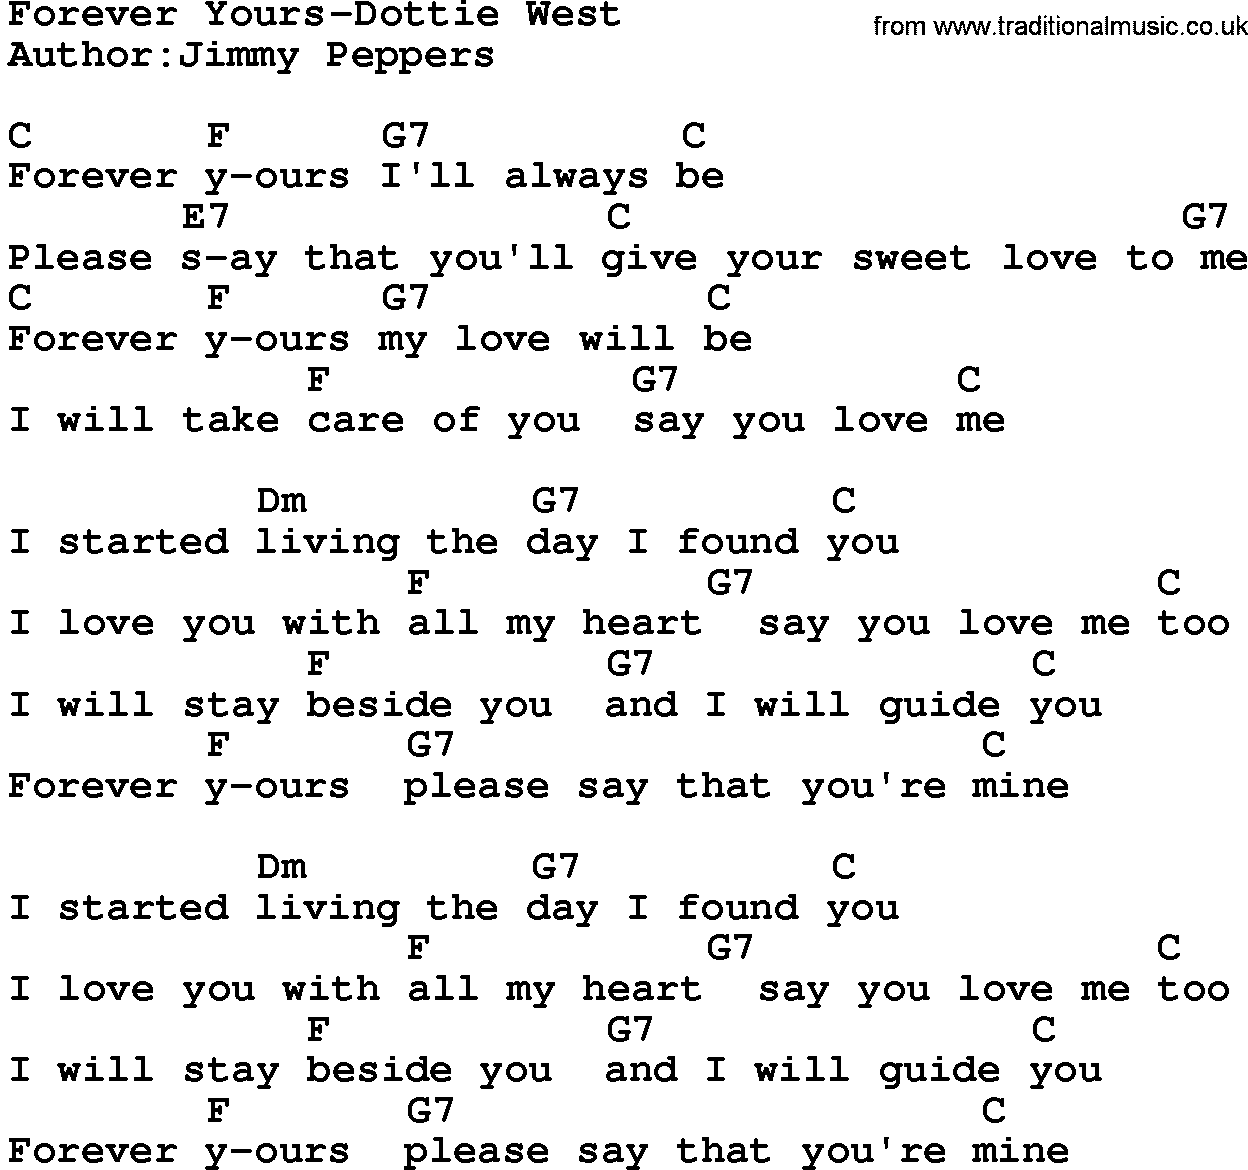 Country music song: Forever Yours-Dottie West lyrics and chords